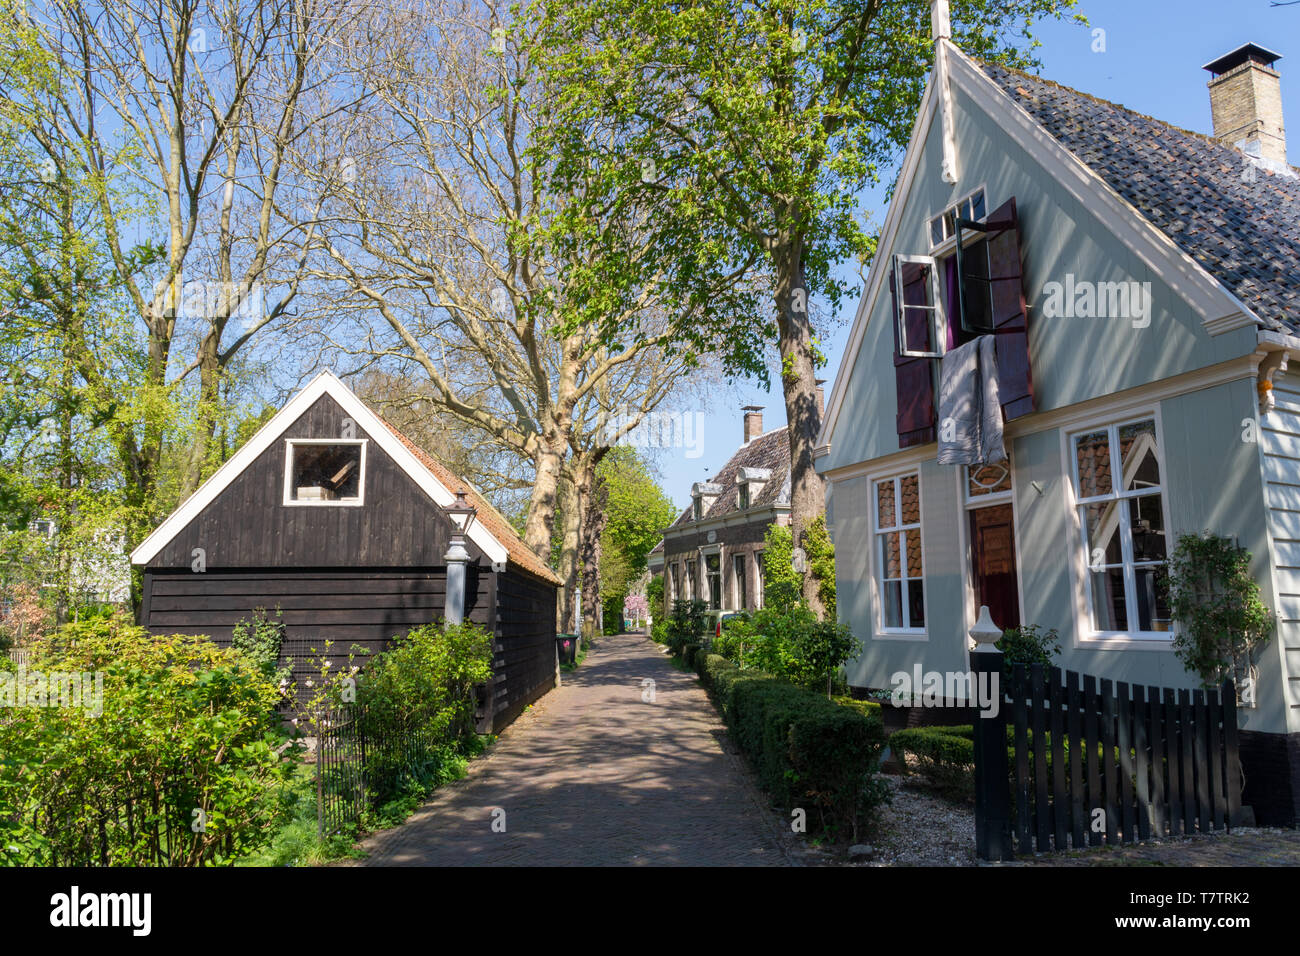 Broek in Waterland, The Netherlands - April 19, 2019: Traditional Dutch houses in the city center Stock Photo